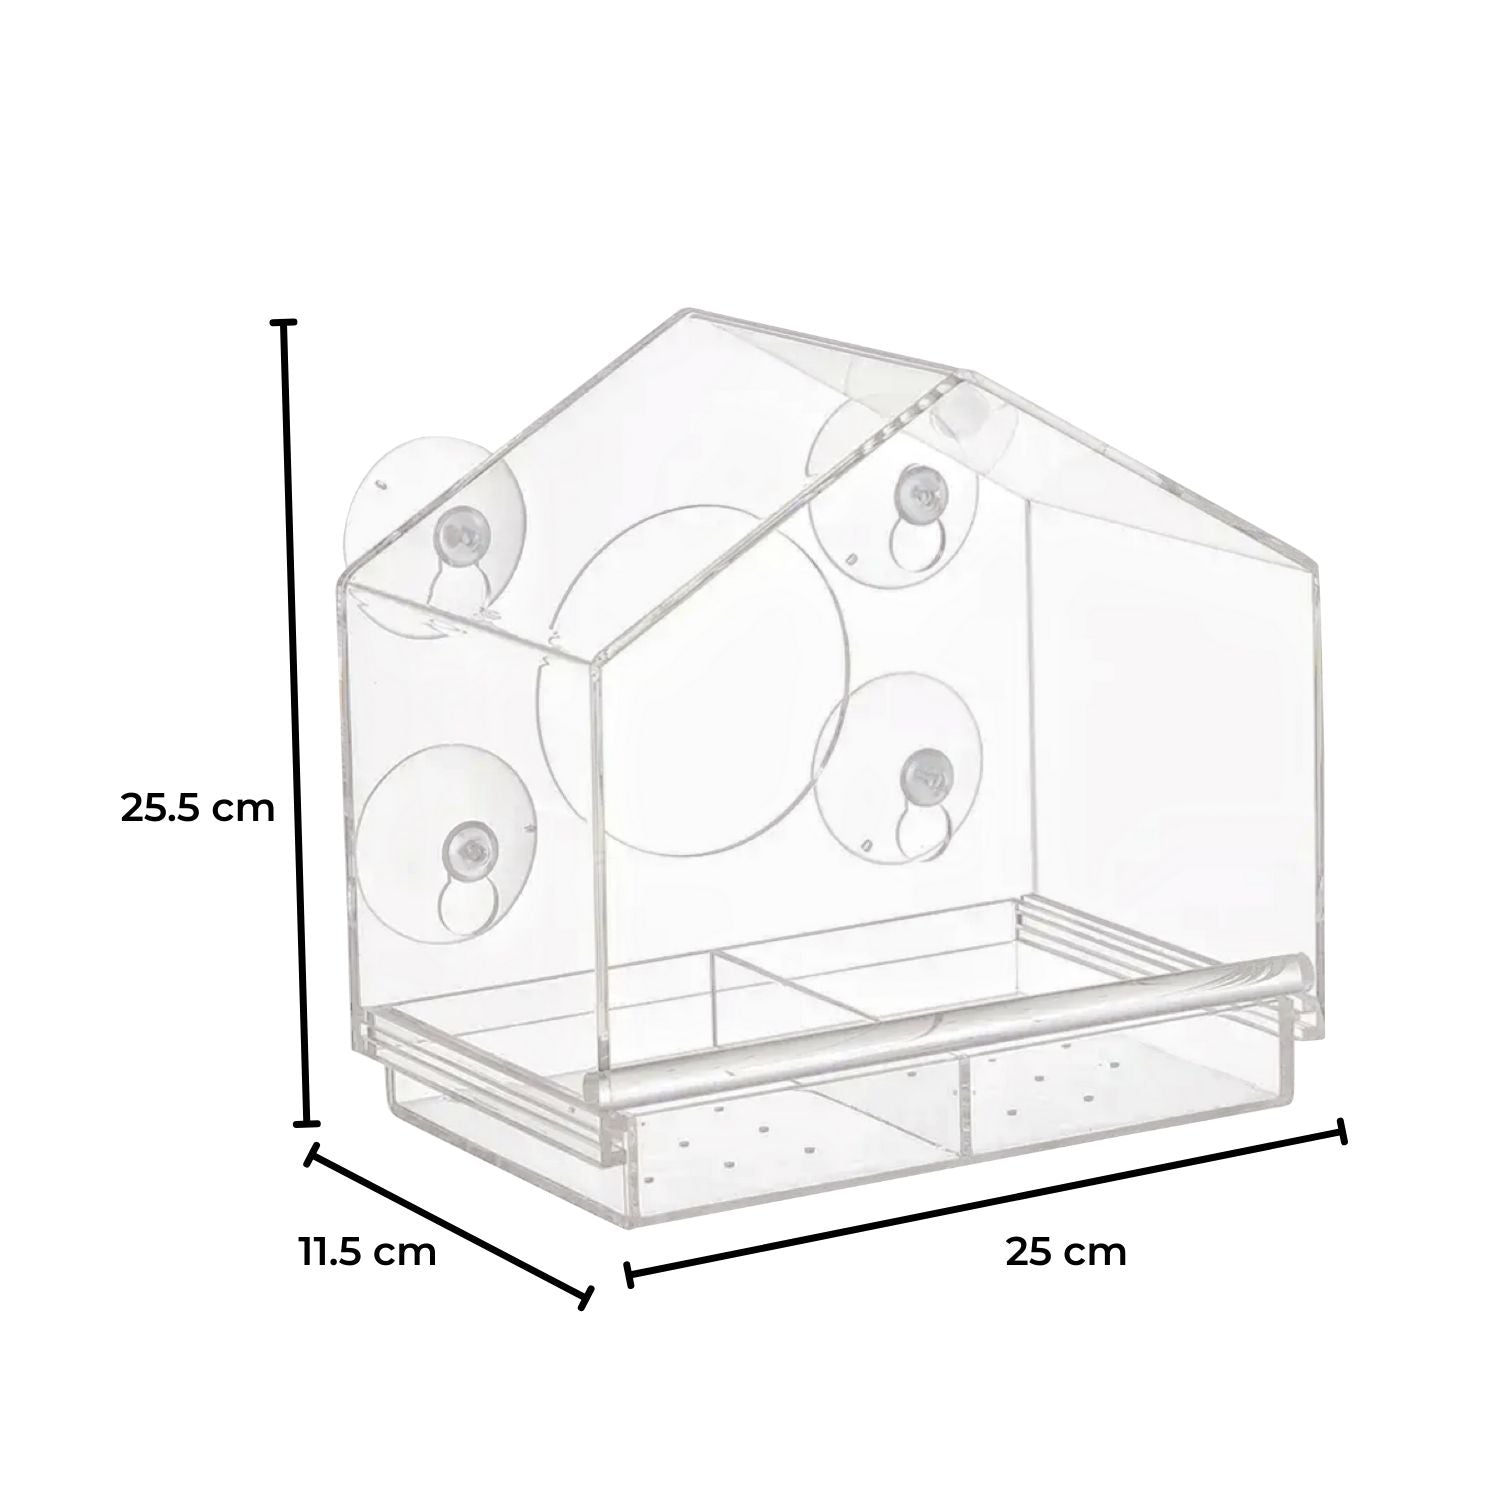 NOVEDEN Window Bird Feeder with Removable Tray Drain Holes and 4 Suction Cups (Transparent)